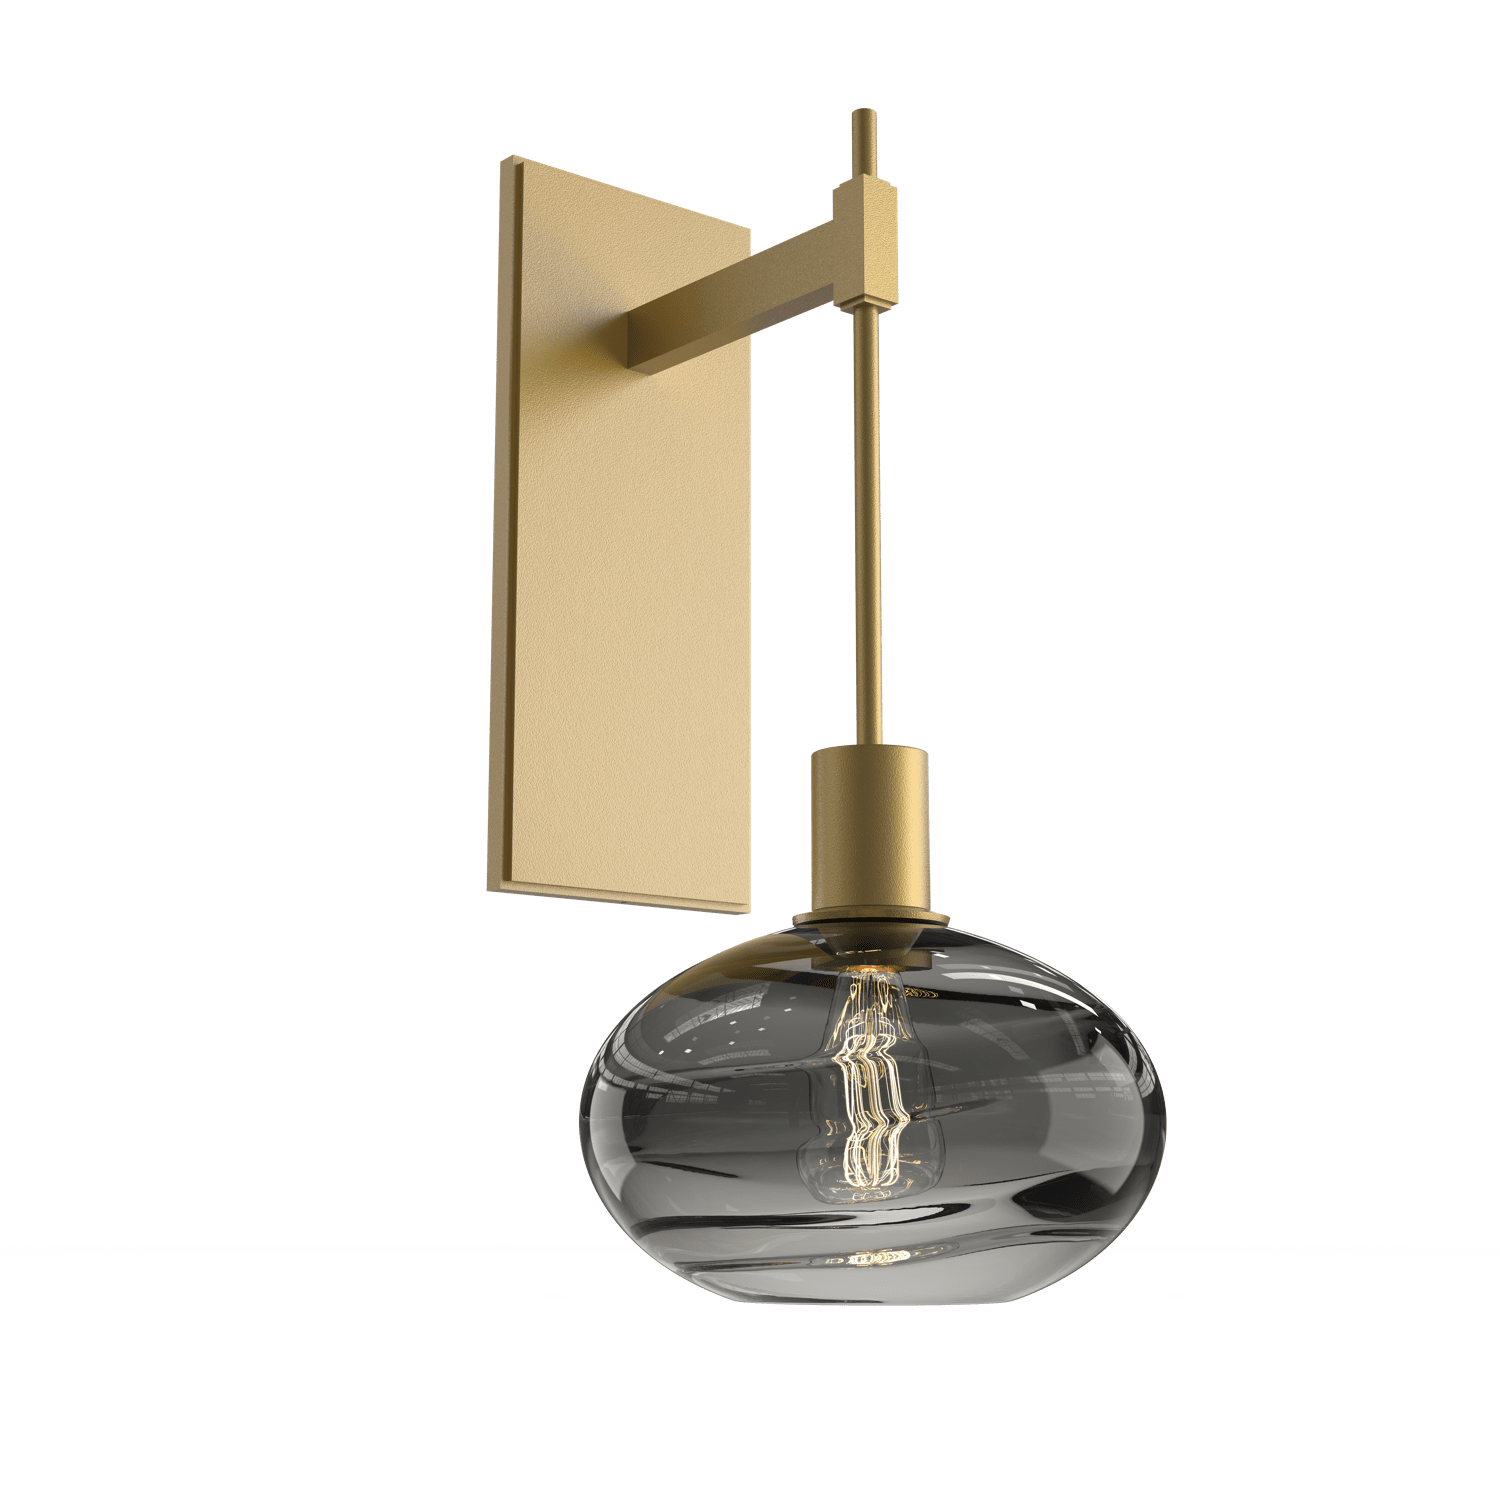 IDB0036-18-GB-OS-Hammerton-Studio-Optic-Blown-Glass-Coppa-tempo-wall-sconce-with-gilded-brass-finish-and-optic-smoke-blown-glass-shades-and-incandescent-lamping